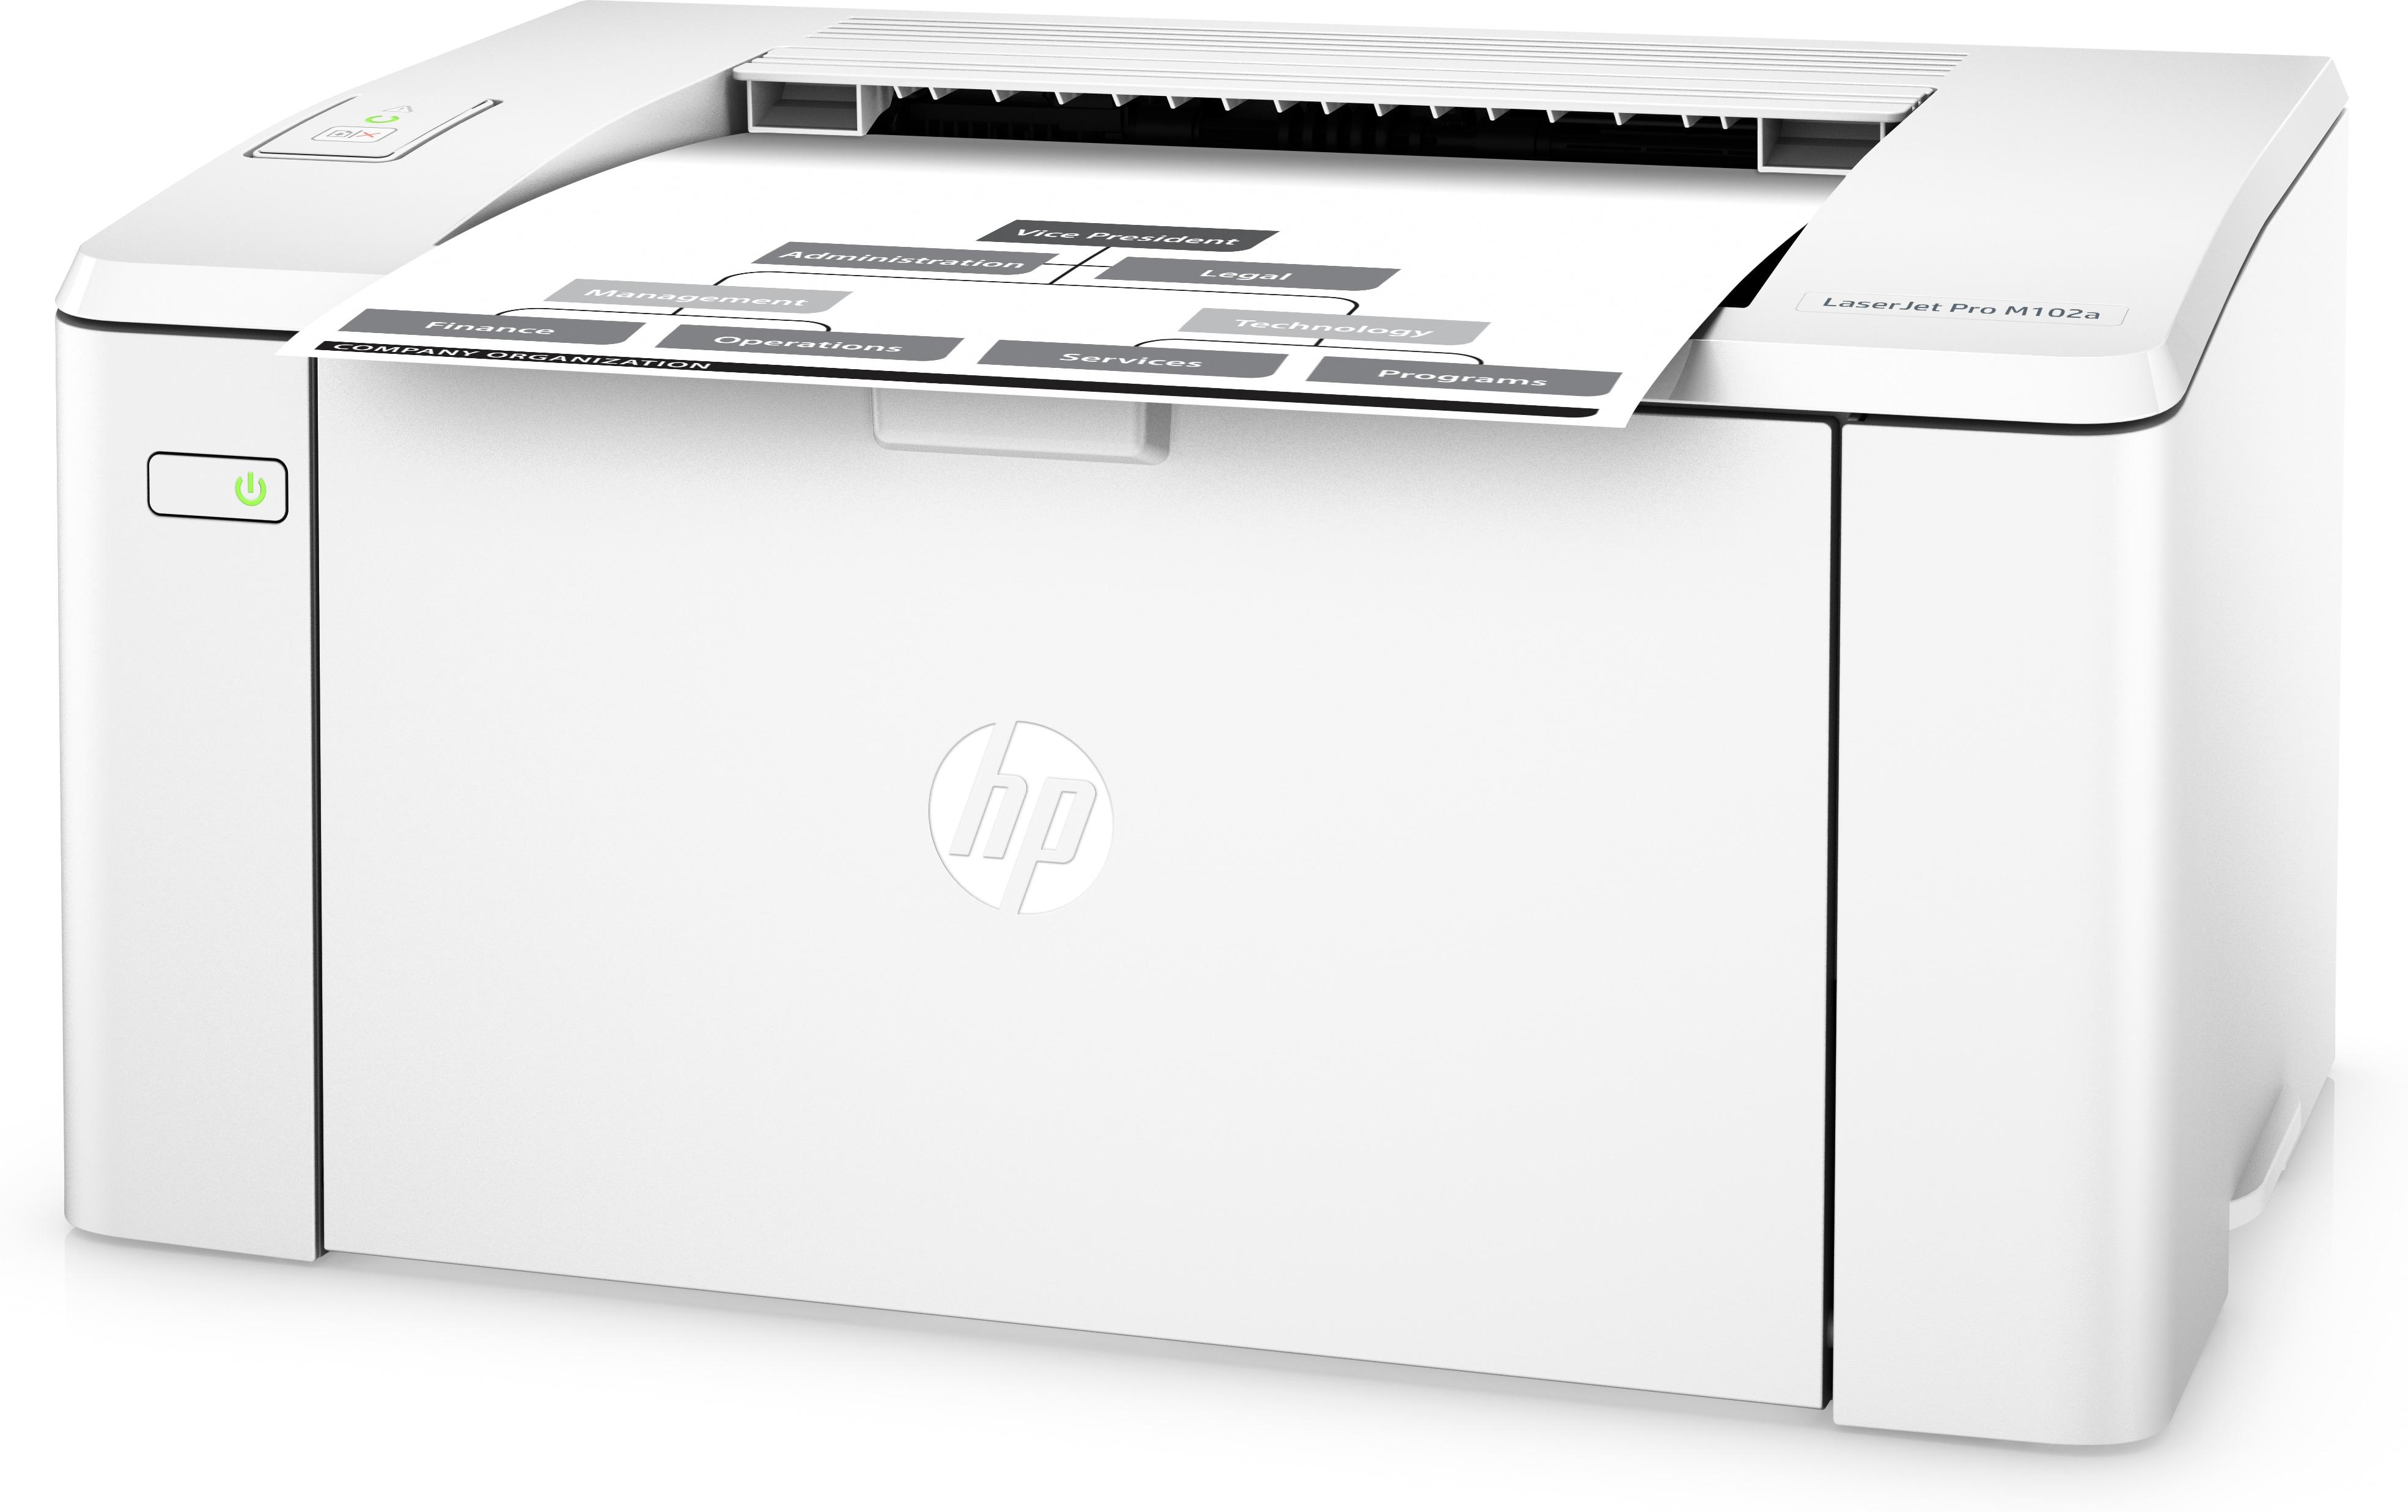 How to fix Laserjet Pro M102a printing half pages after firmware update